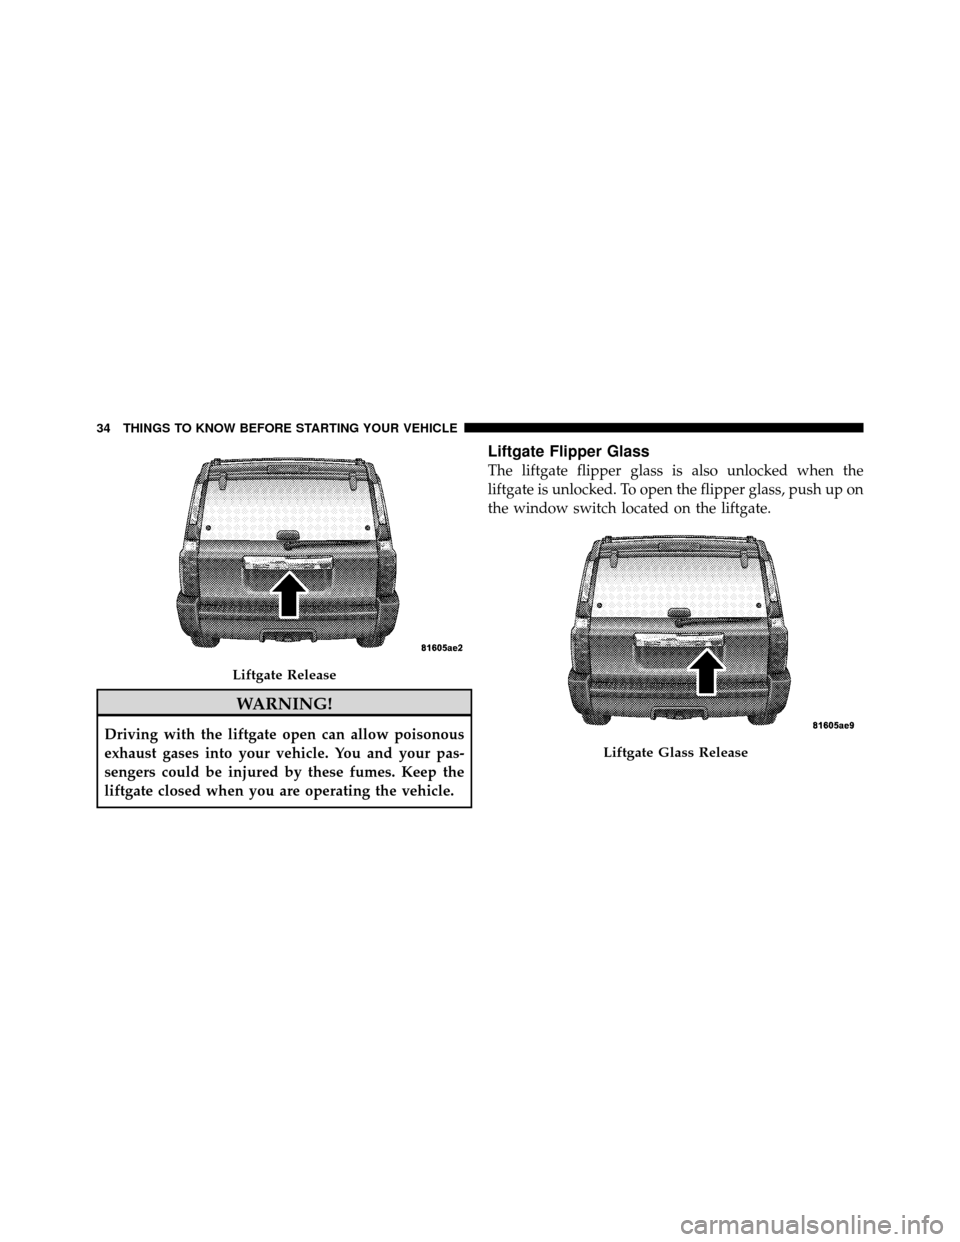 JEEP COMMANDER 2010 1.G Owners Manual WARNING!
Driving with the liftgate open can allow poisonous
exhaust gases into your vehicle. You and your pas-
sengers could be injured by these fumes. Keep the
liftgate closed when you are operating 